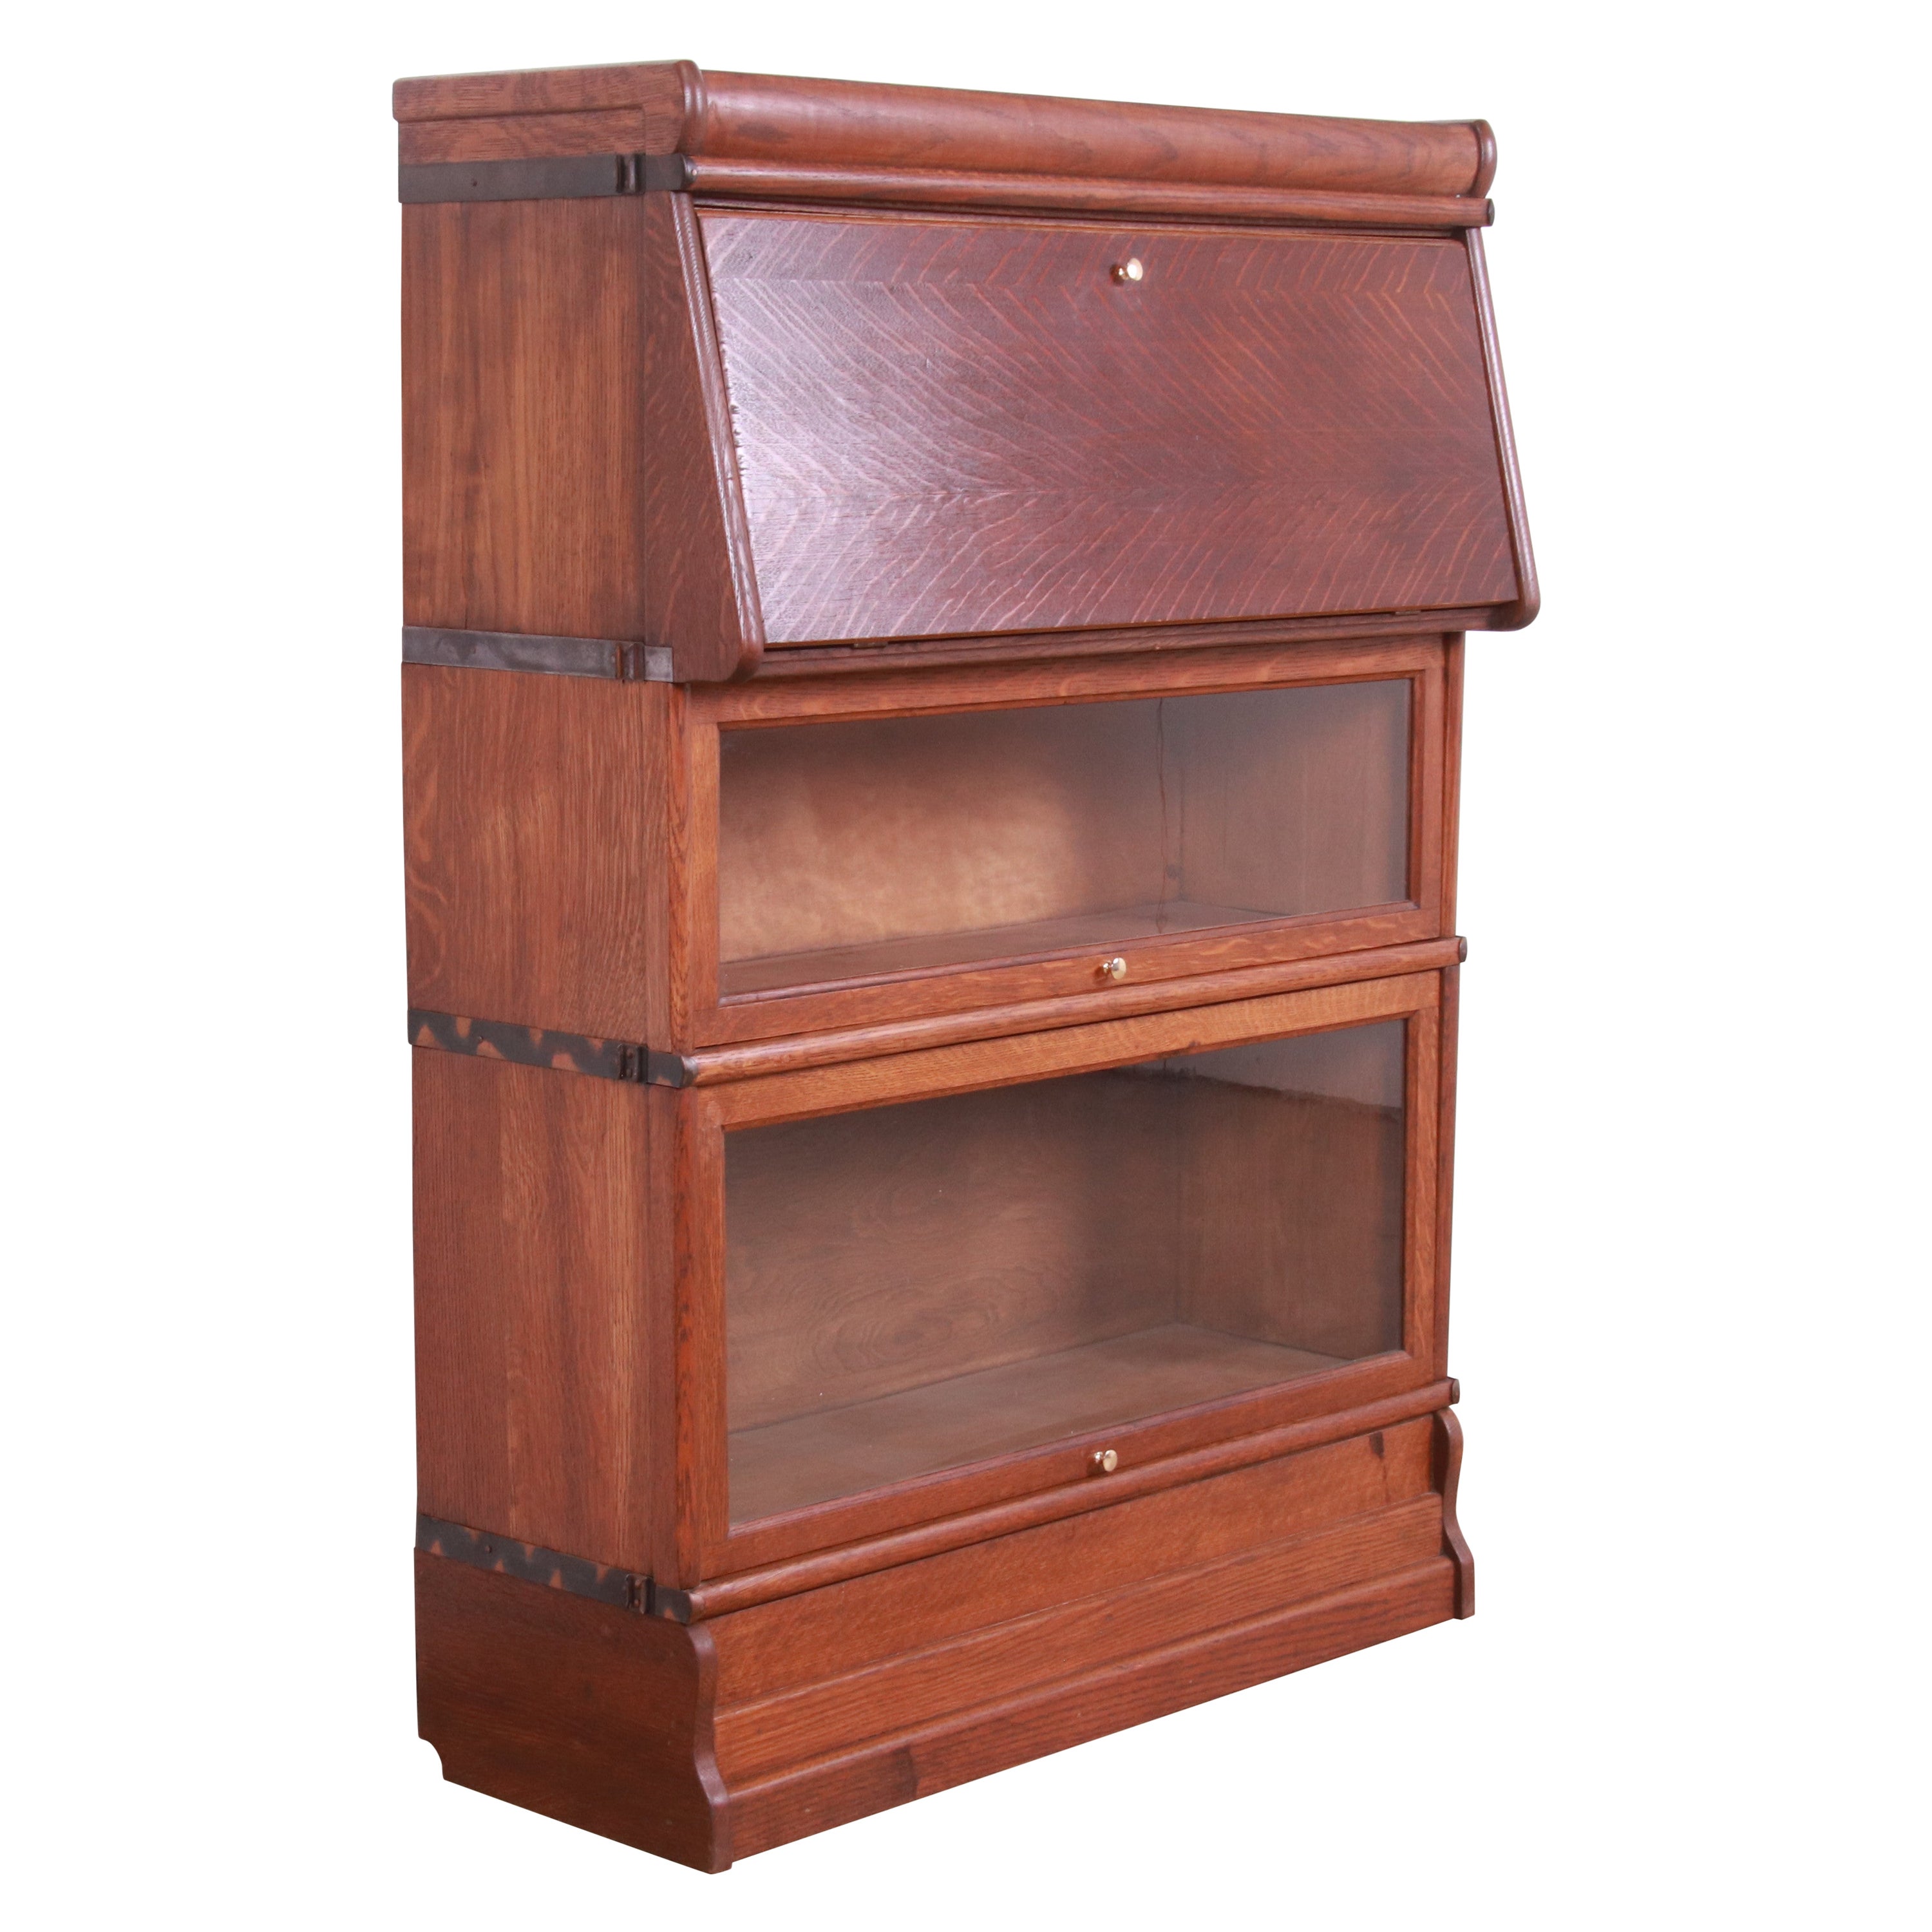 Arts & Crafts Oak Barrister Bookcase with Drop Front Secretary Desk, circa 1920s For Sale